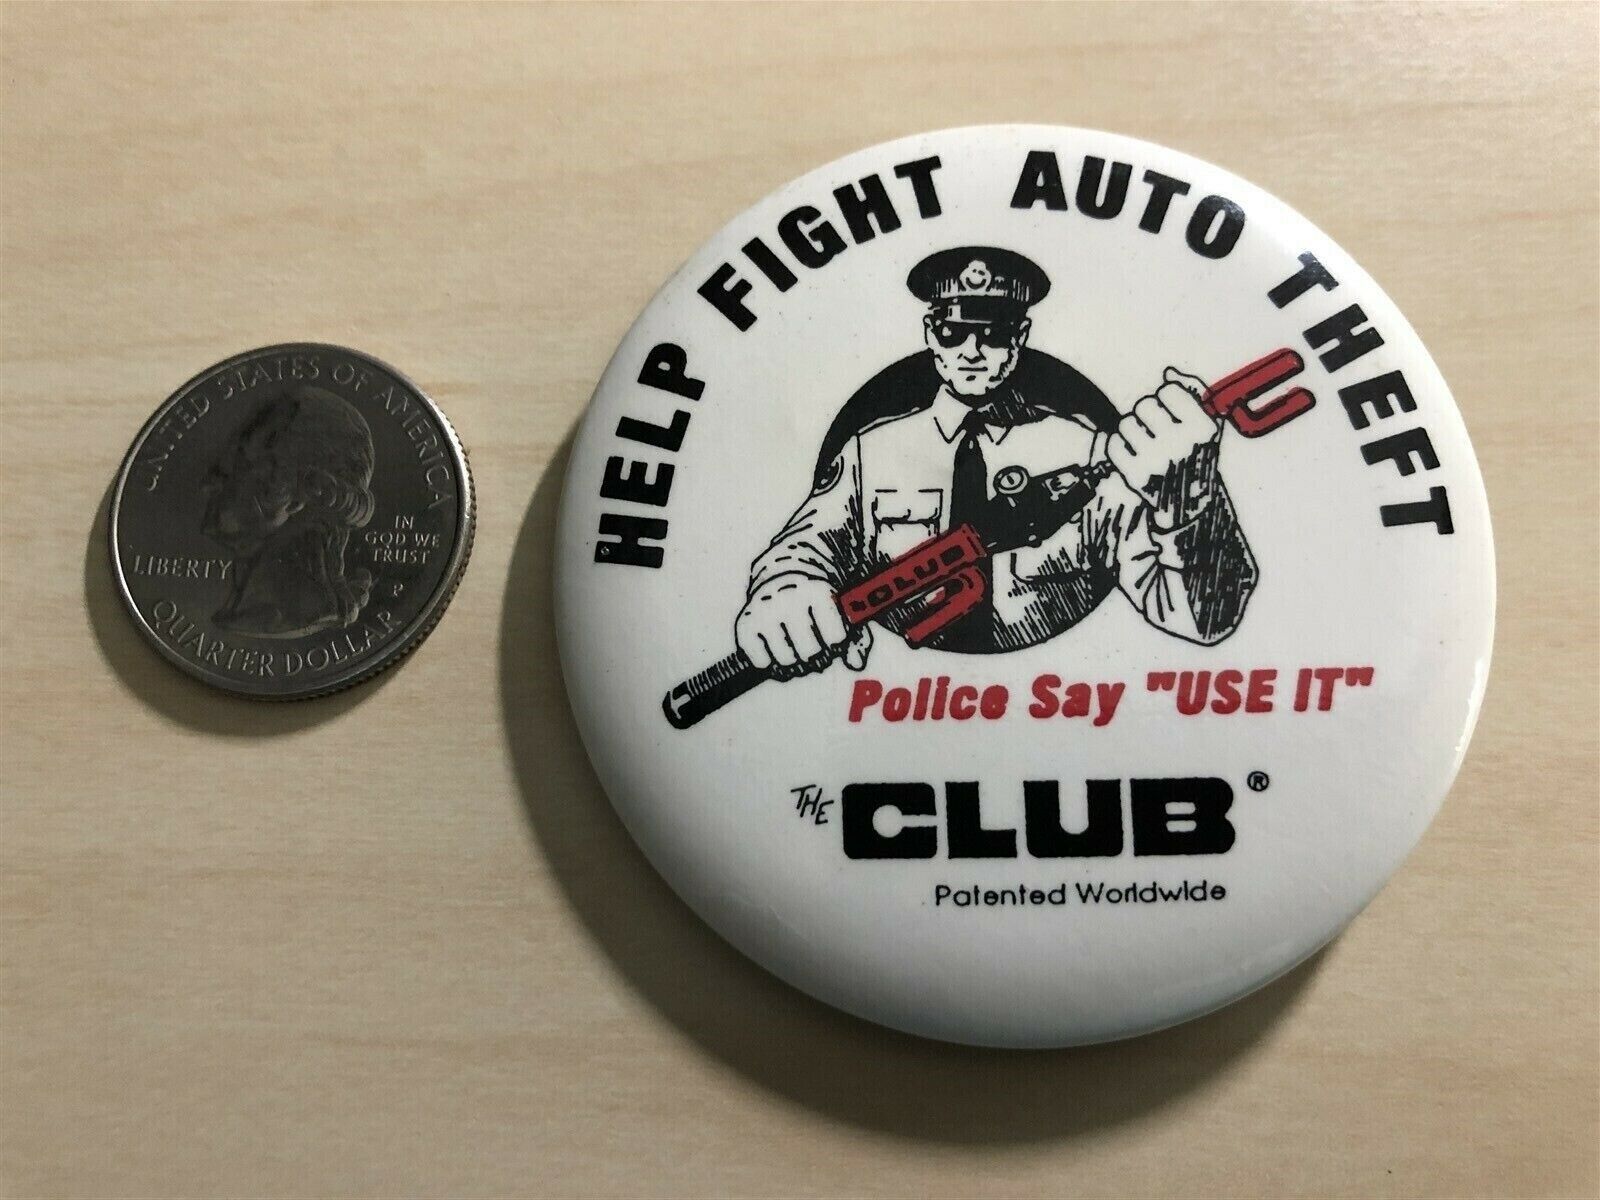 The Club Help Fight Auto Theft Police Say Use IT Vintage Pinback Button #33914